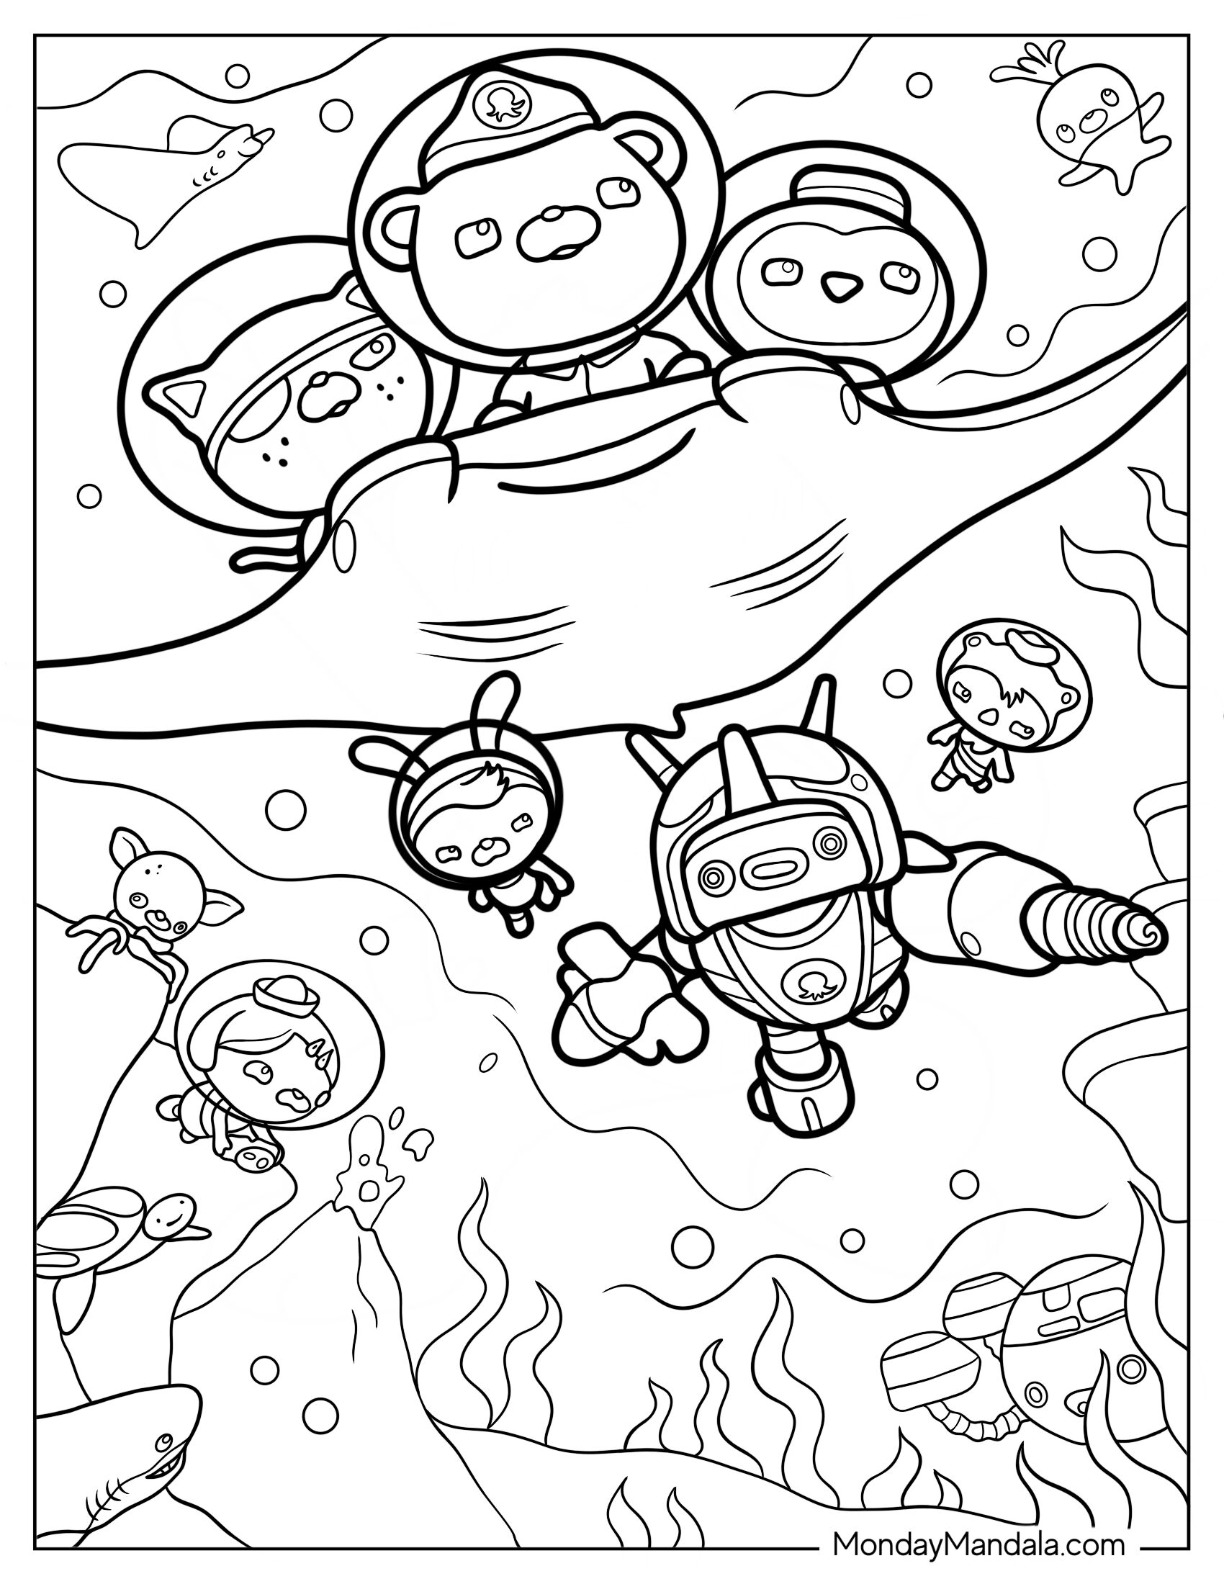 Octonauts coloring pages free pdf printables